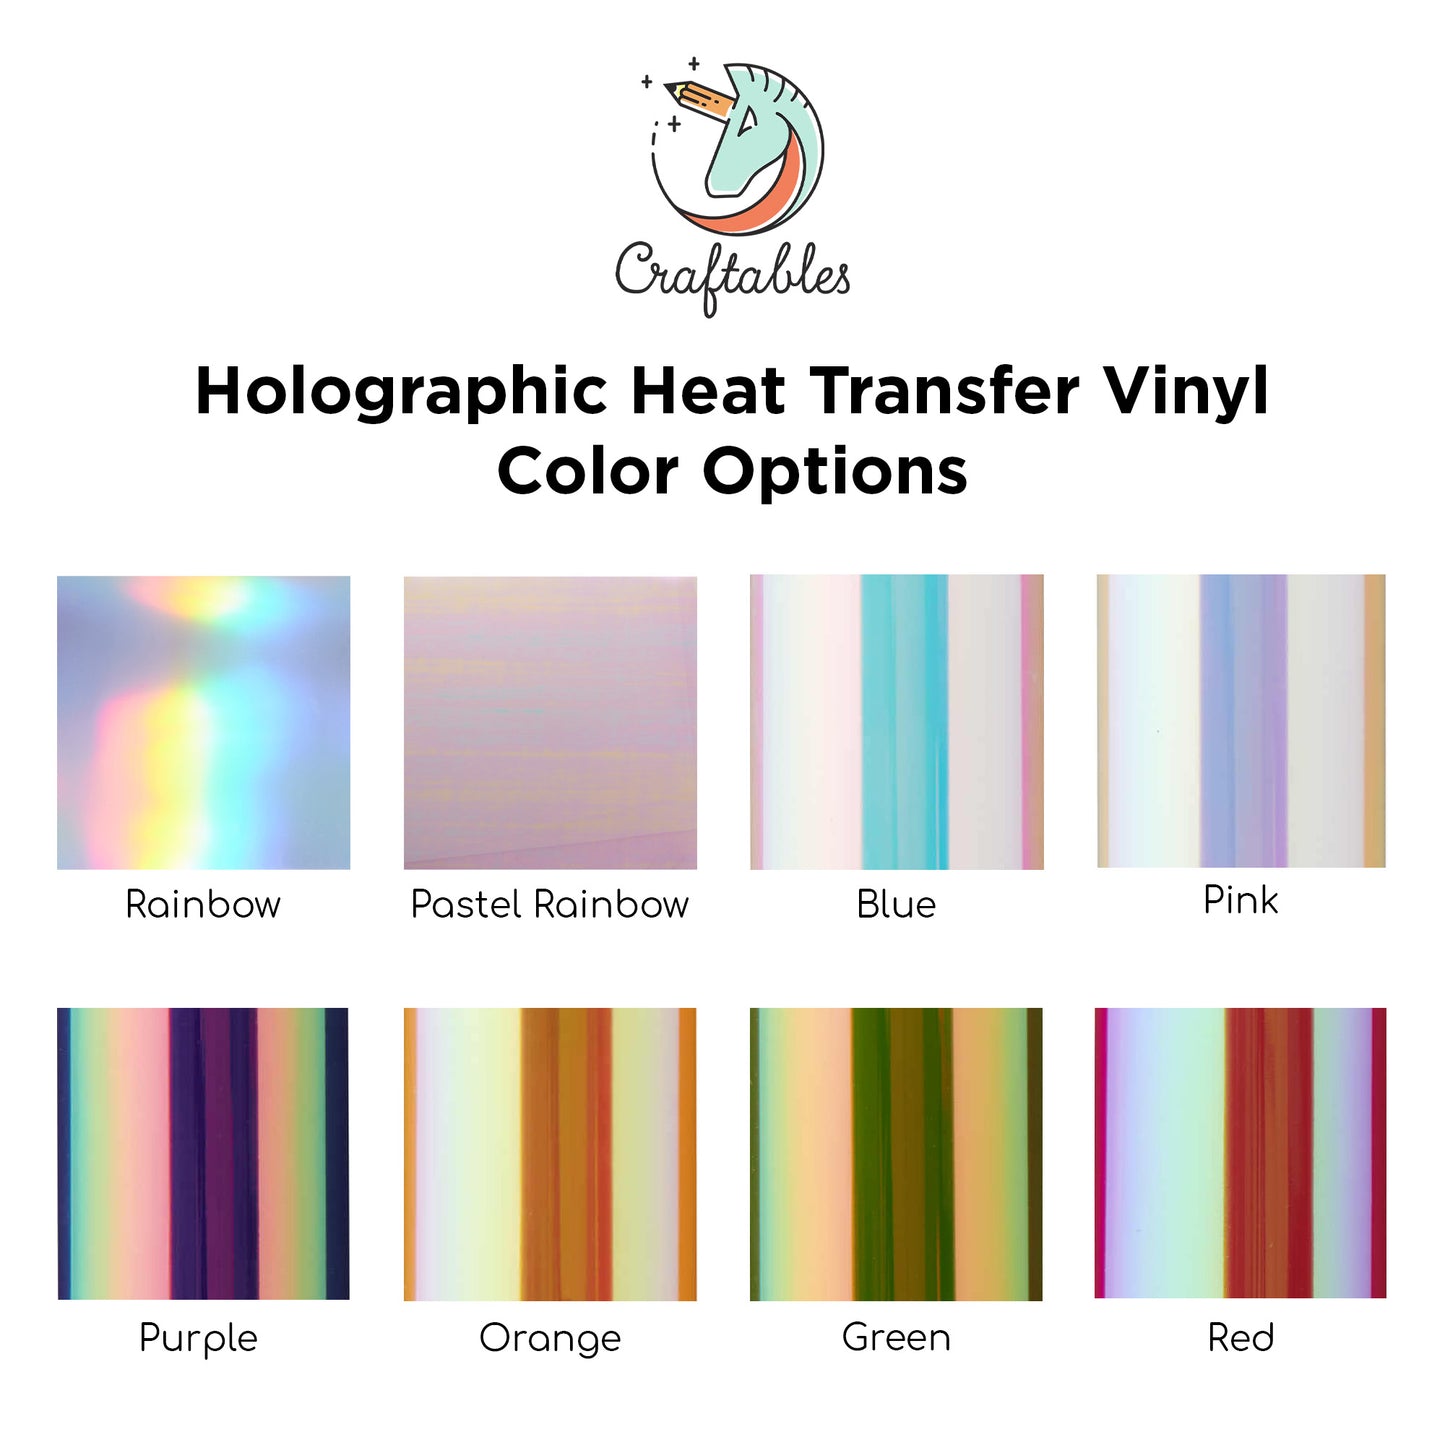 Green Holographic Heat Transfer Vinyl Sheets By Craftables